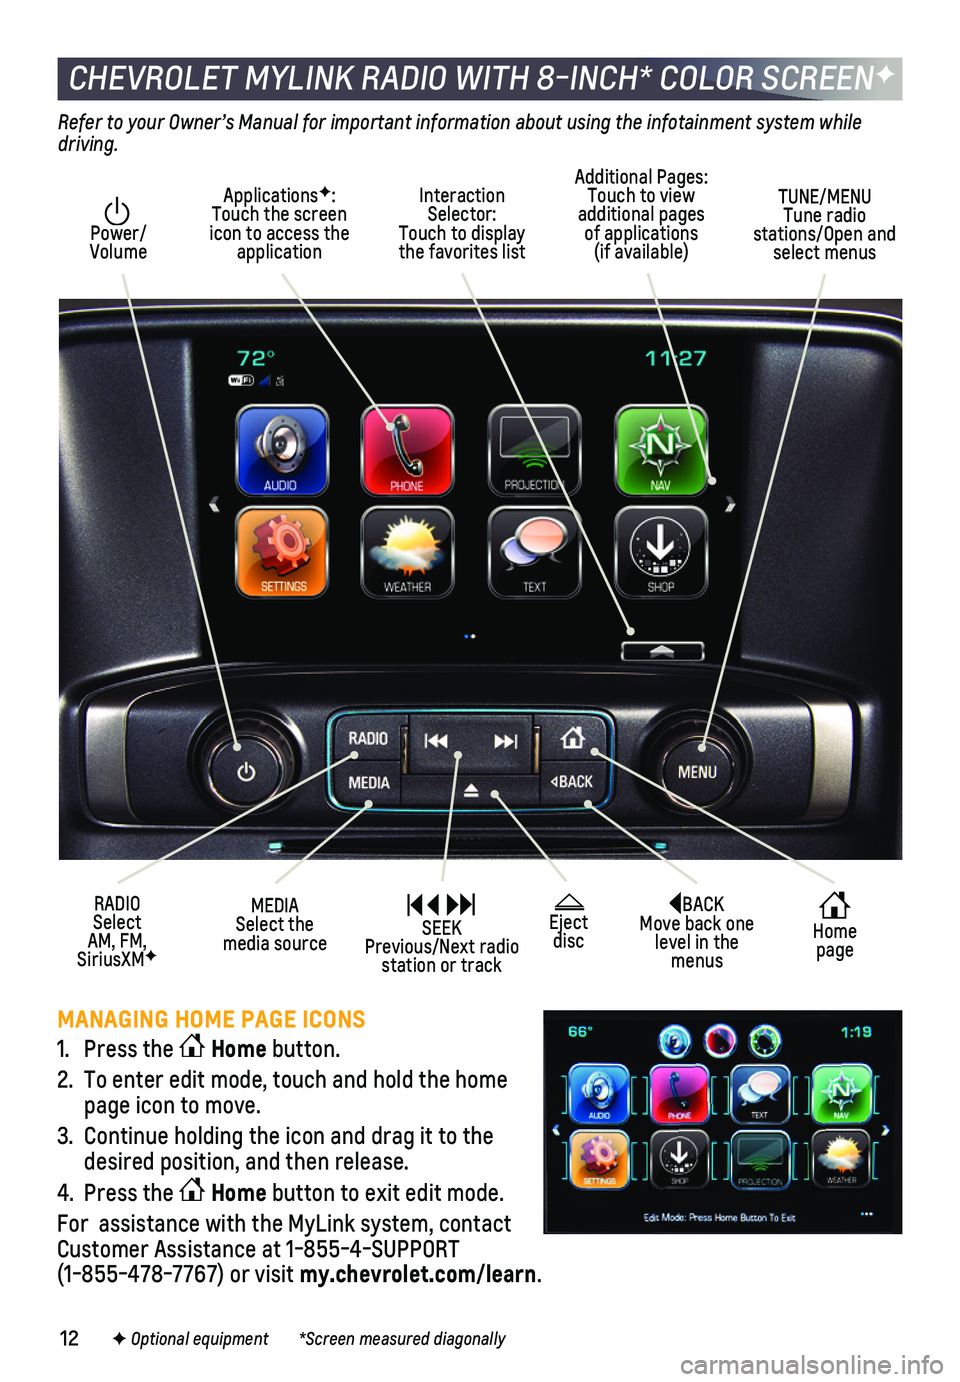 CHEVROLET SILVERADO 2018  Get To Know Guide 12
CHEVROLET MYLINK RADIO WITH 8-INCH* COLOR SCREENF
BACK  Move back one level in the menus
 Home page
 Eject disc
Interaction Selector:  Touch to display the favorites list
TUNE/MENU  Tune radio stat